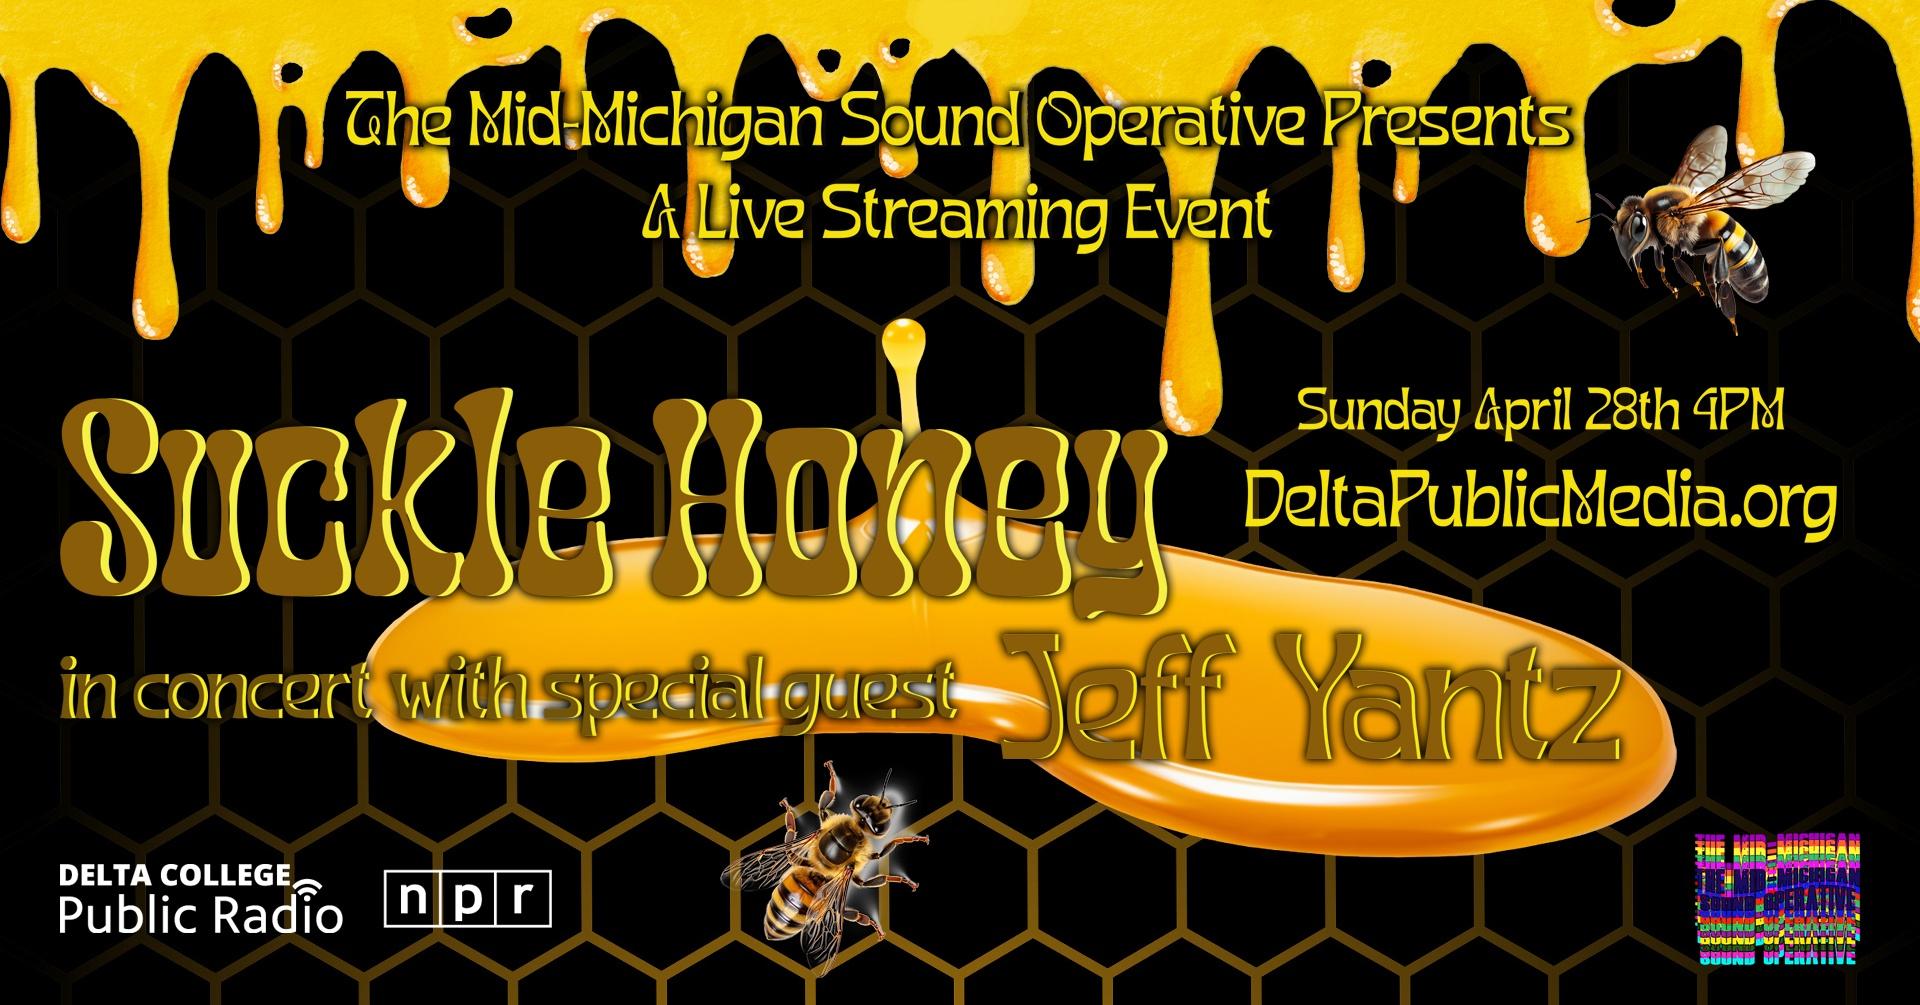 The Mid-Michigan Sound Operative Presents a Live Streaming Event: Suckle Honey in concert with special guest Jeff Yantz. Sunday, April 28 at 4 pm.